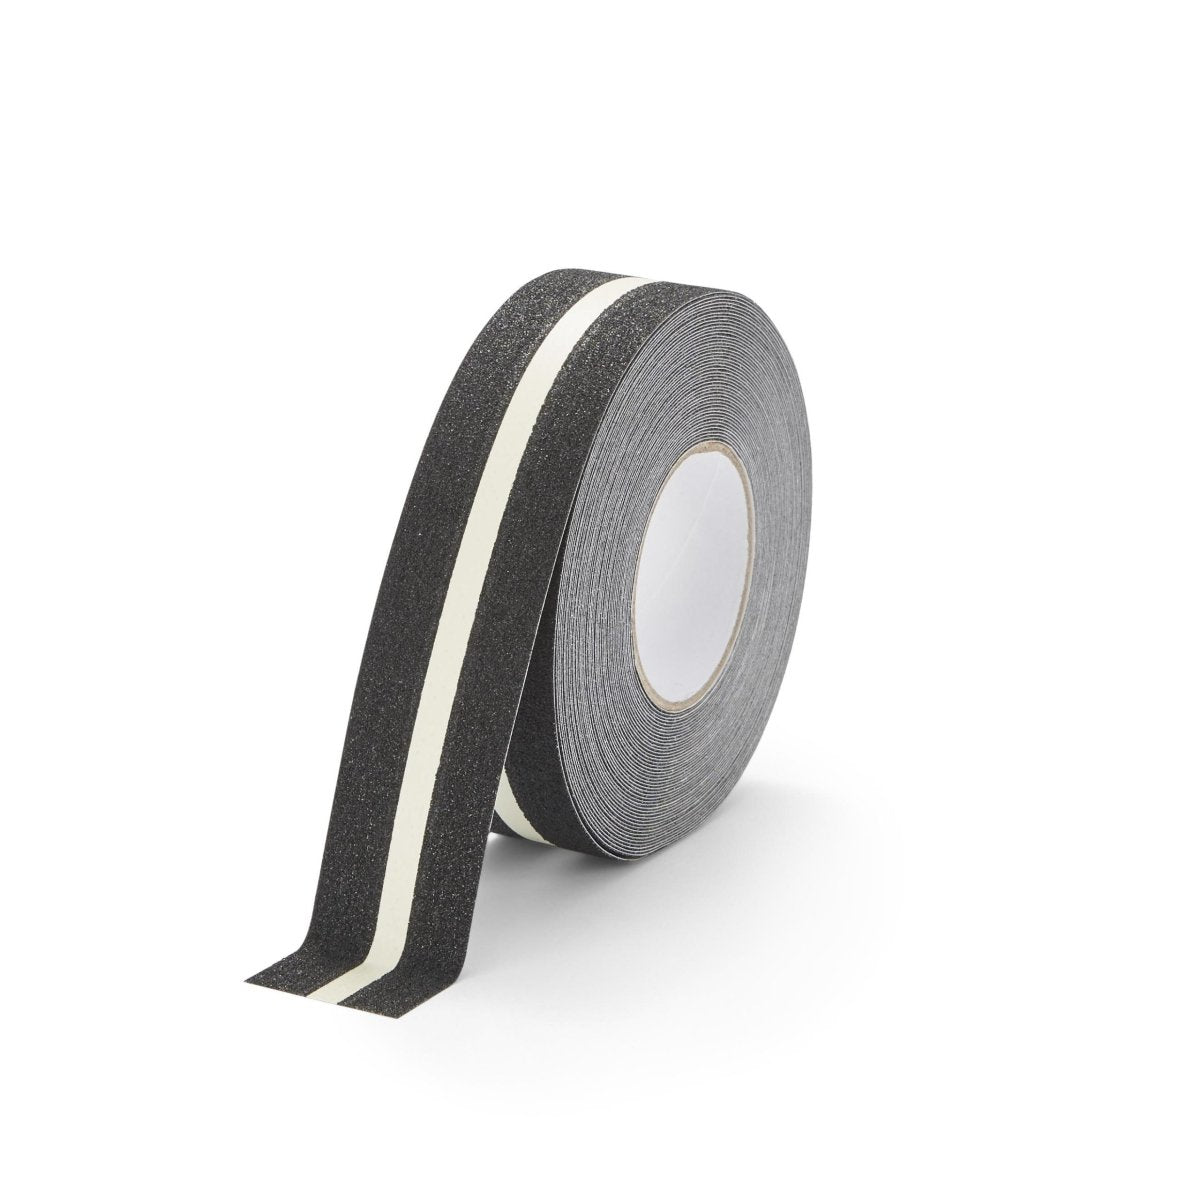 Black Safety-Grip with photoluminescent stripe Anti Slip Tape Roll - Slips Away - H3403N-Glow-Line-Safety-Grip-50mm-N -